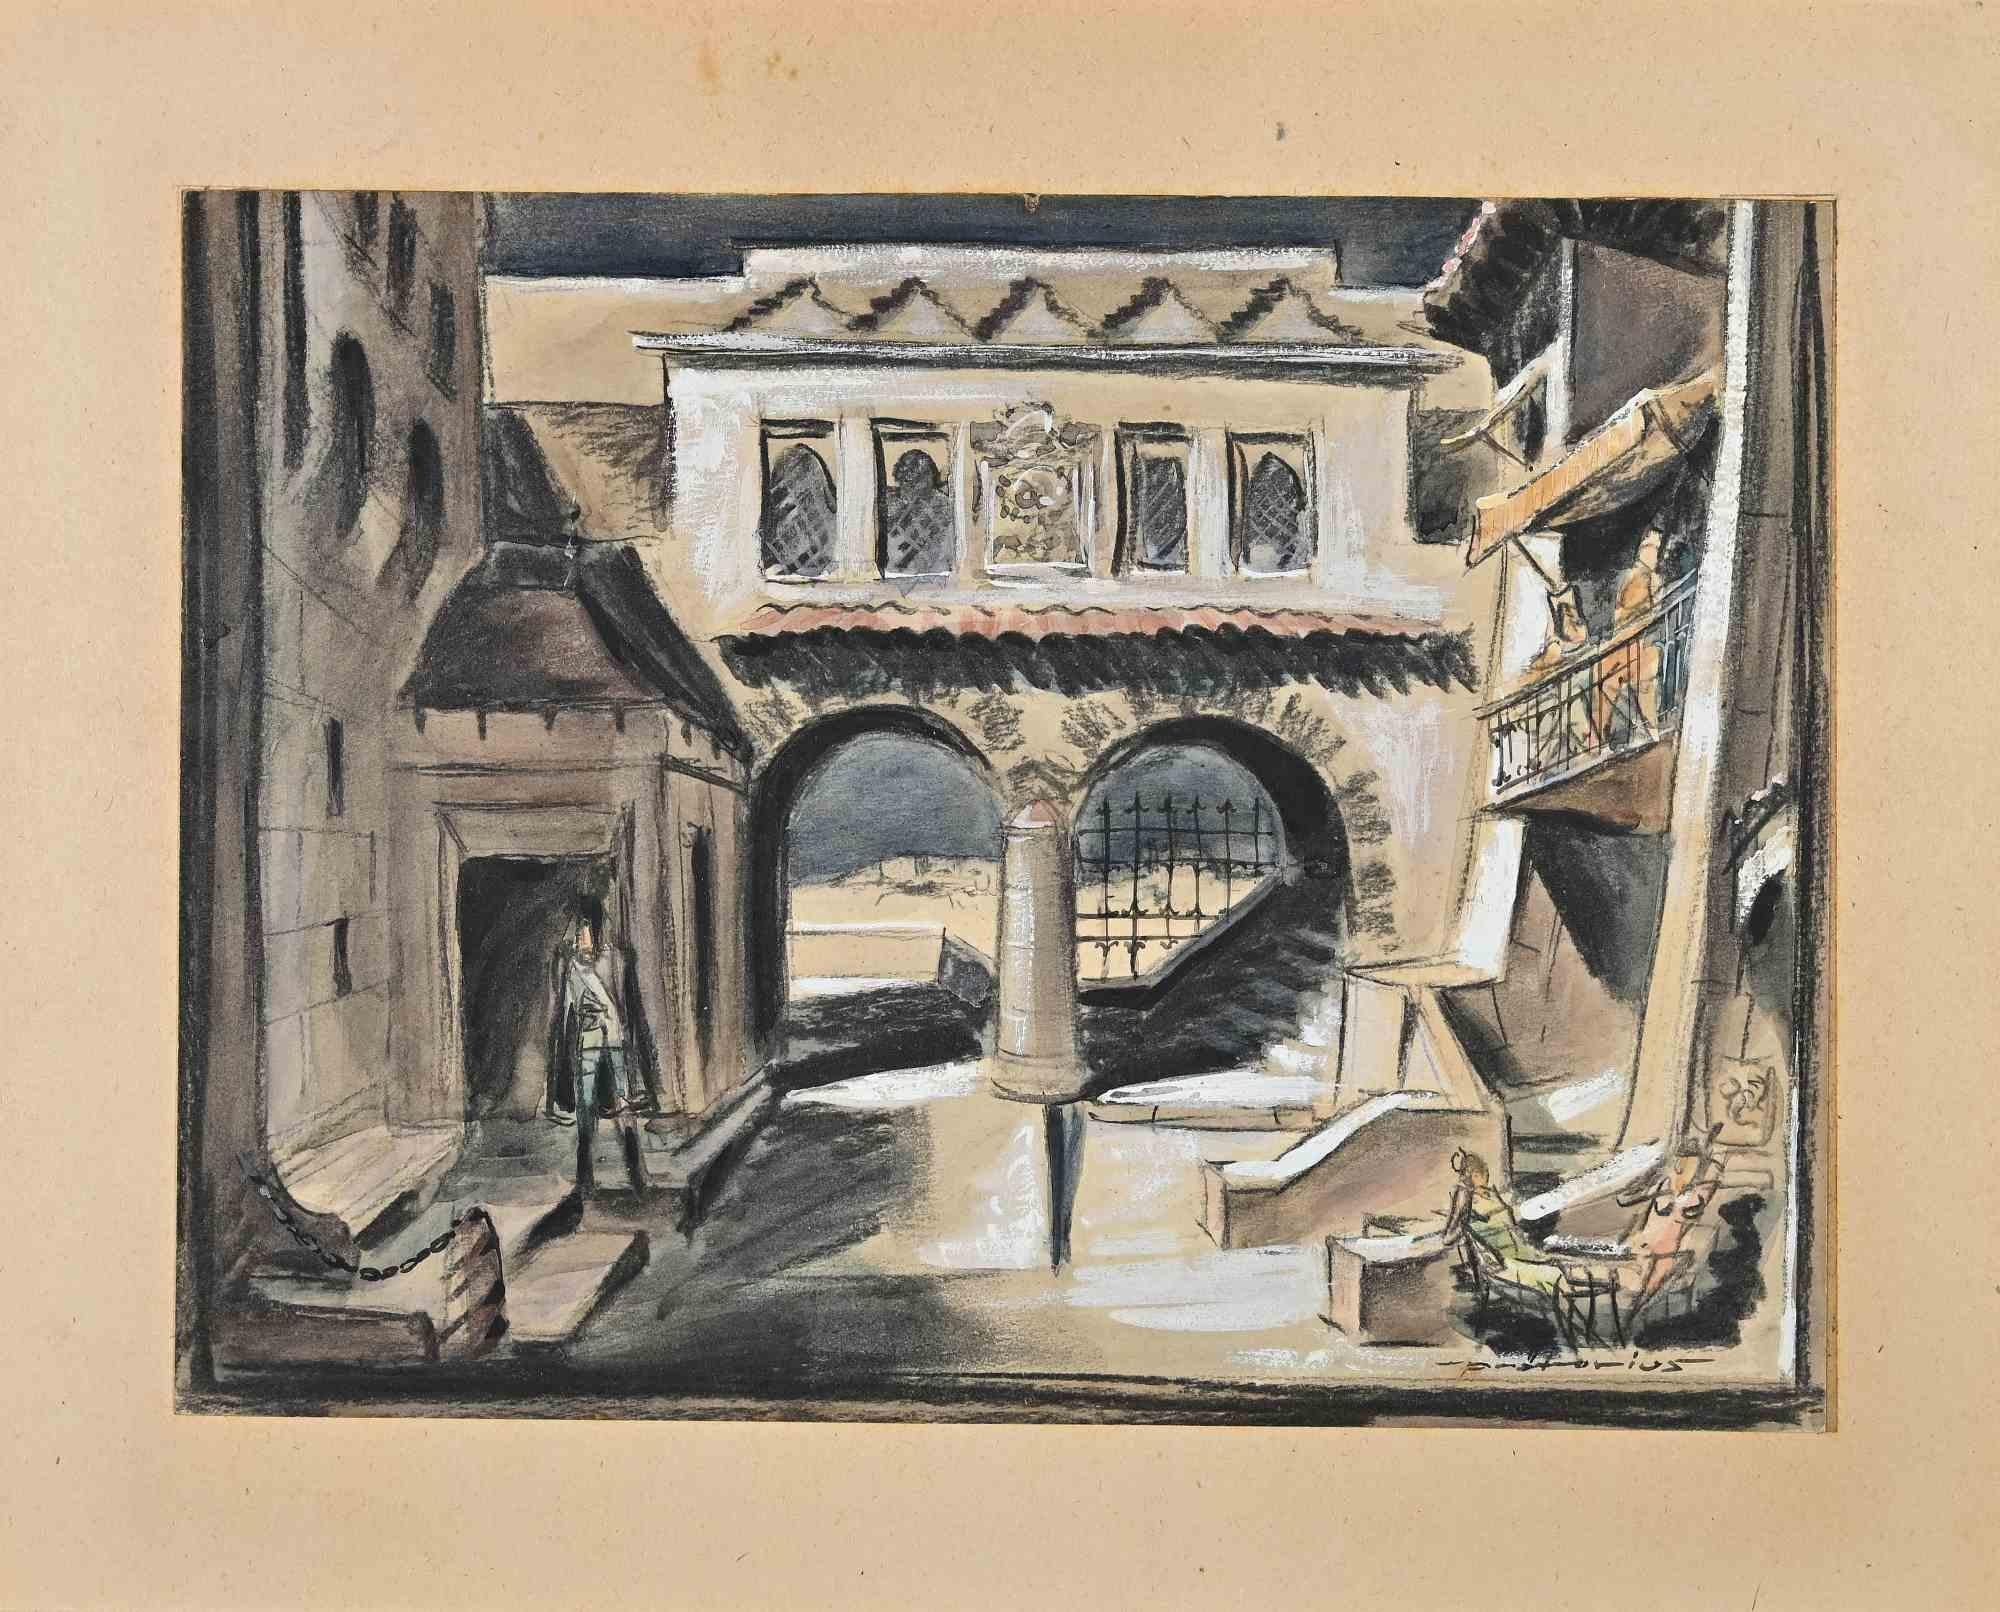 Interior is an Original drawing in ink, charcoal and watercolor realized in the late 19th Century by Ludwig Max Praetorius (1813-1887).

Good conditions.

The artwork is depicted through soft strokes in a well-balanced composition.